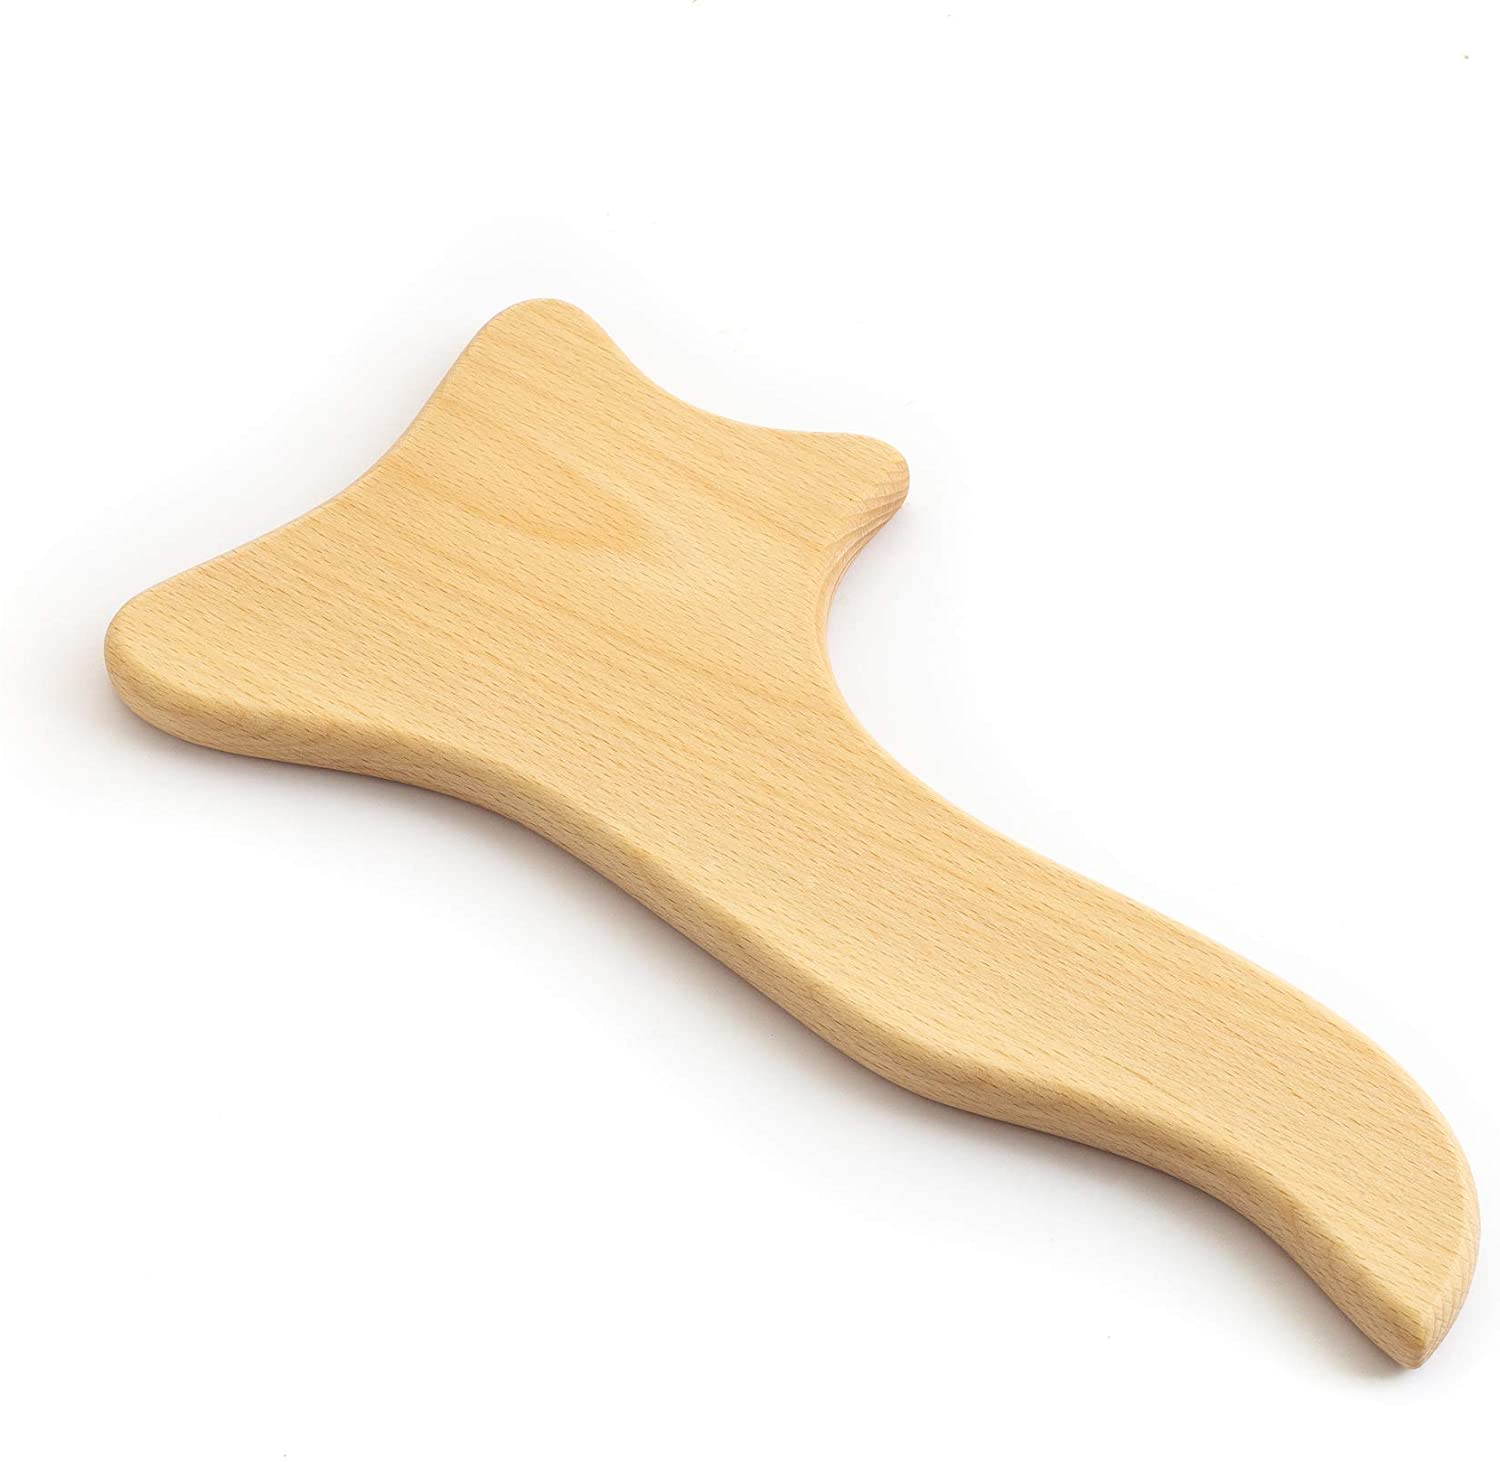 Wooden Anti Cellulite Maderotherapy Massage Tool